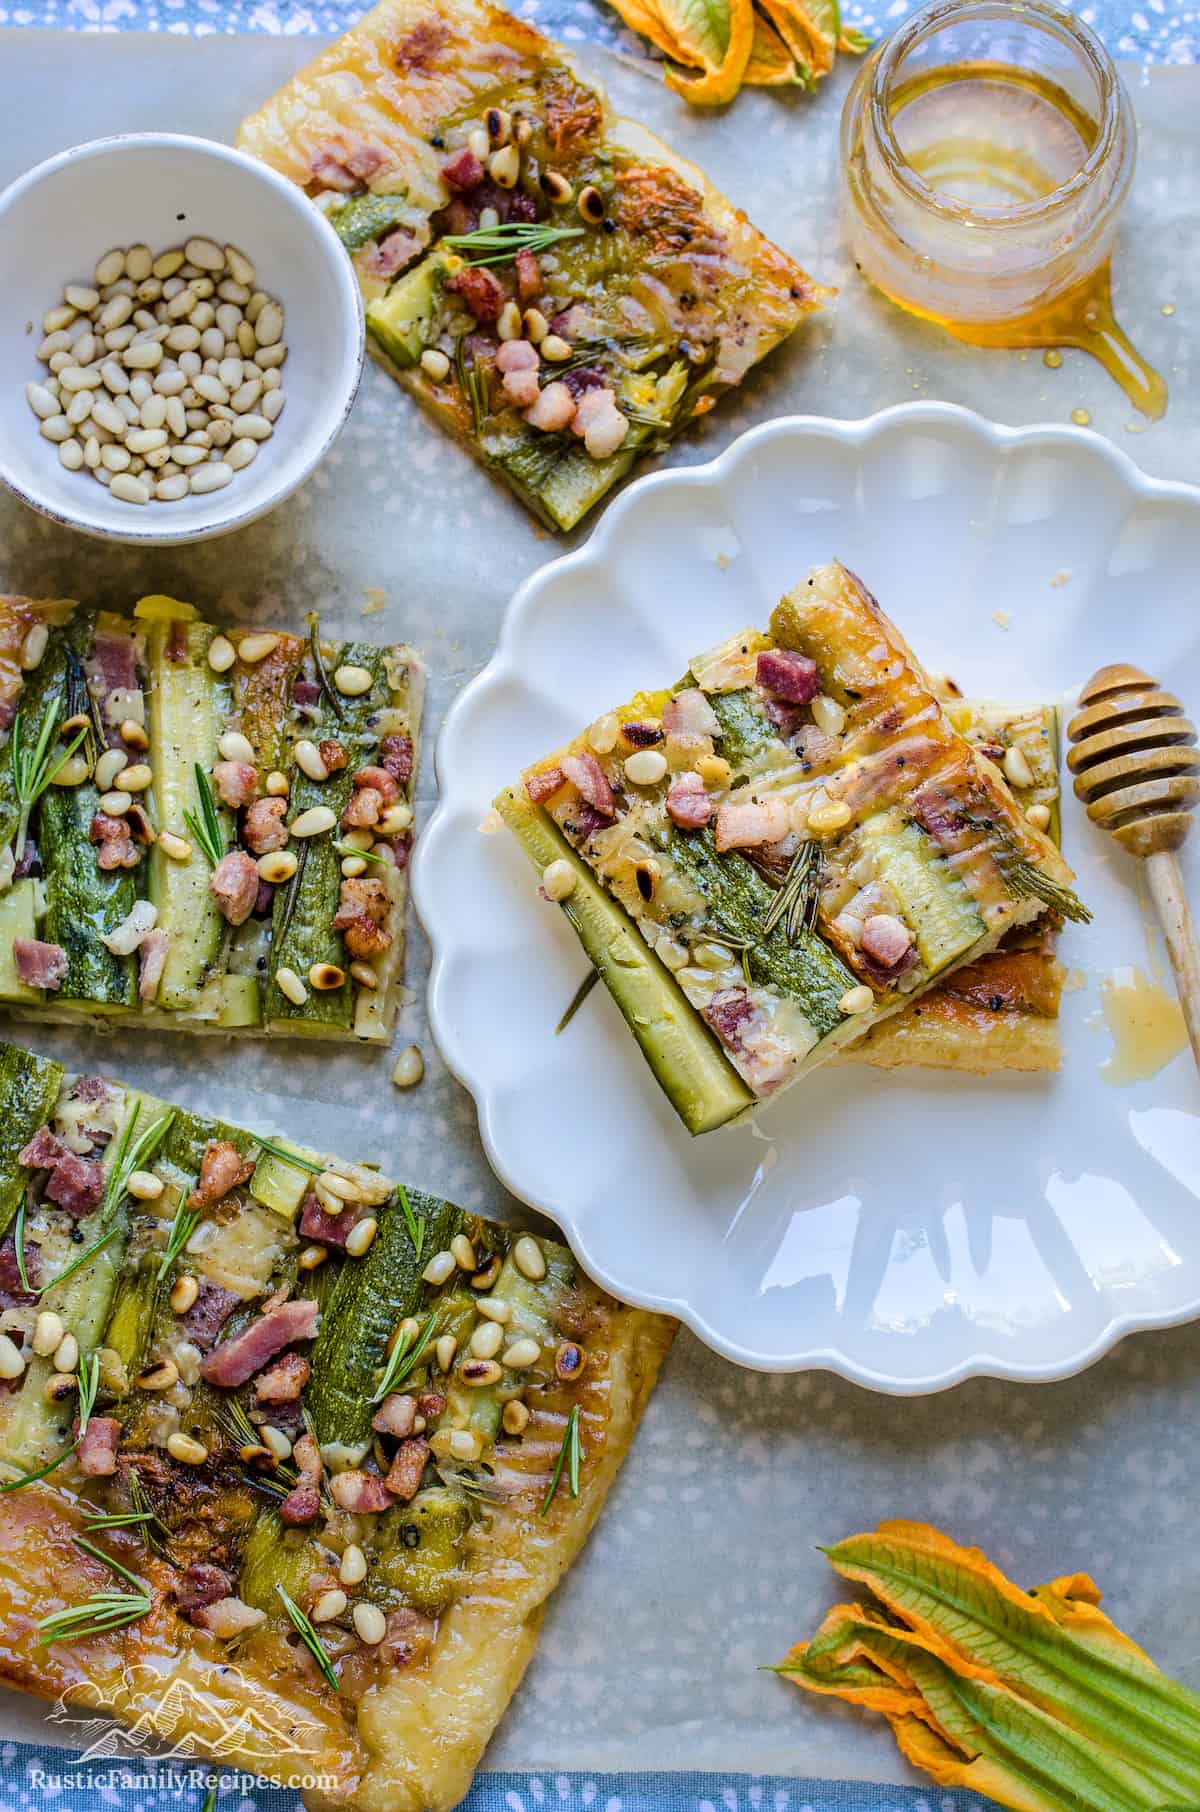 Two slices of zucchini tart stacked on a white plate, surrounded by more slices.